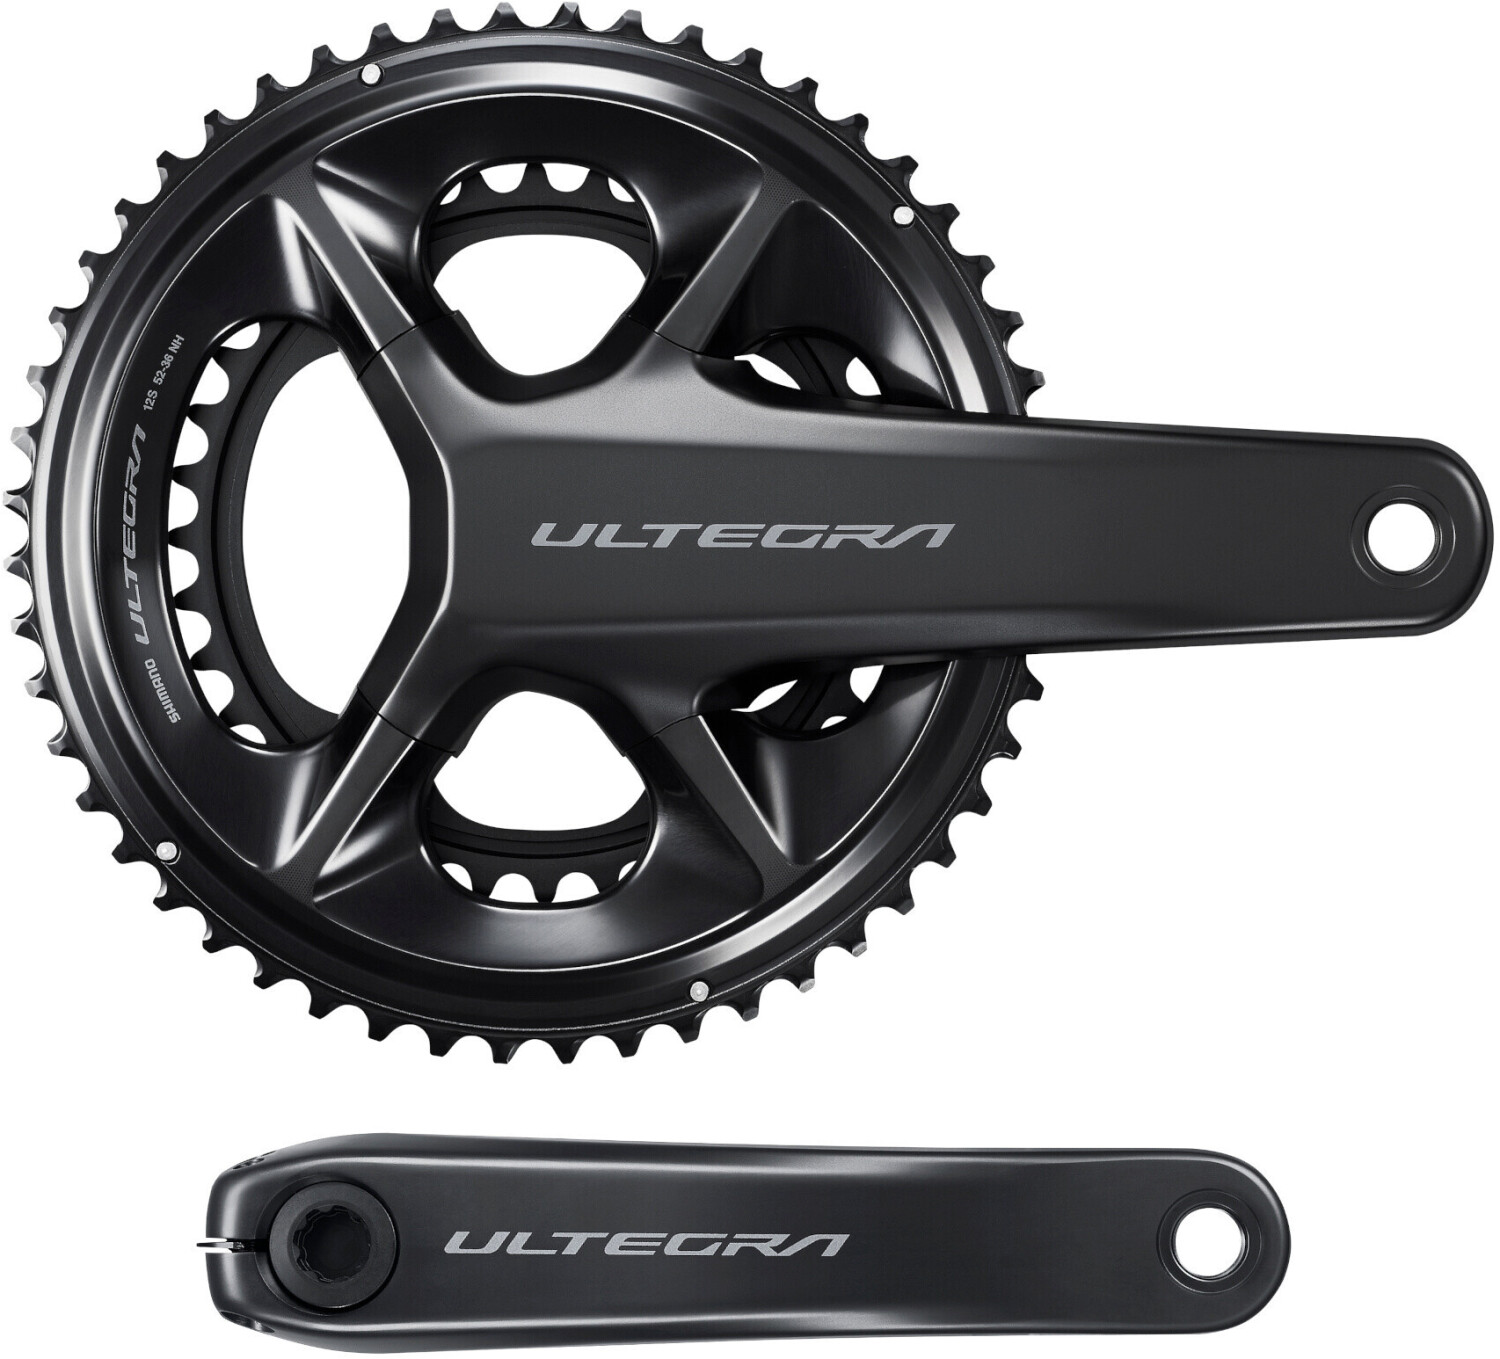 Buy Shimano Ultegra FC-R8100 (50-34) 172.5mm from £229.00 (Today